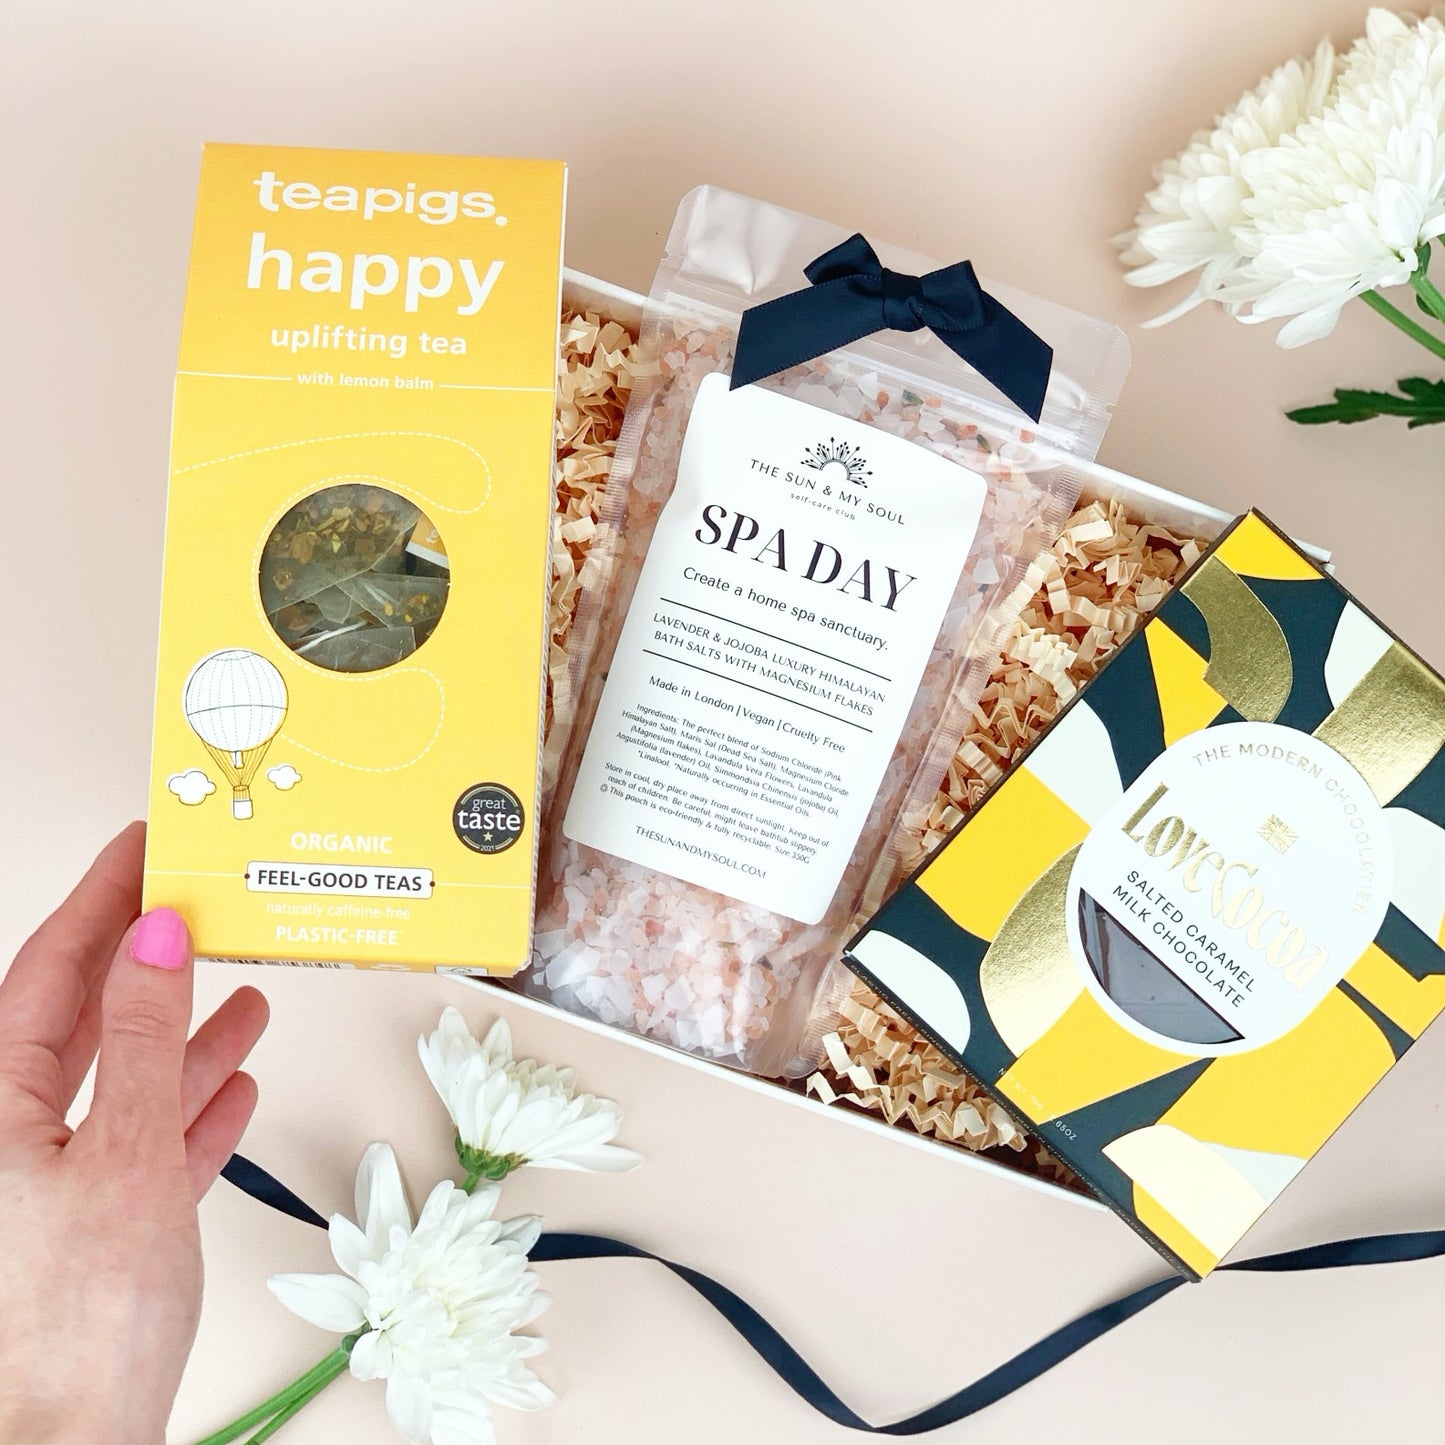 Recharge and Rejuvenate Uplifting Self-care Gift Box